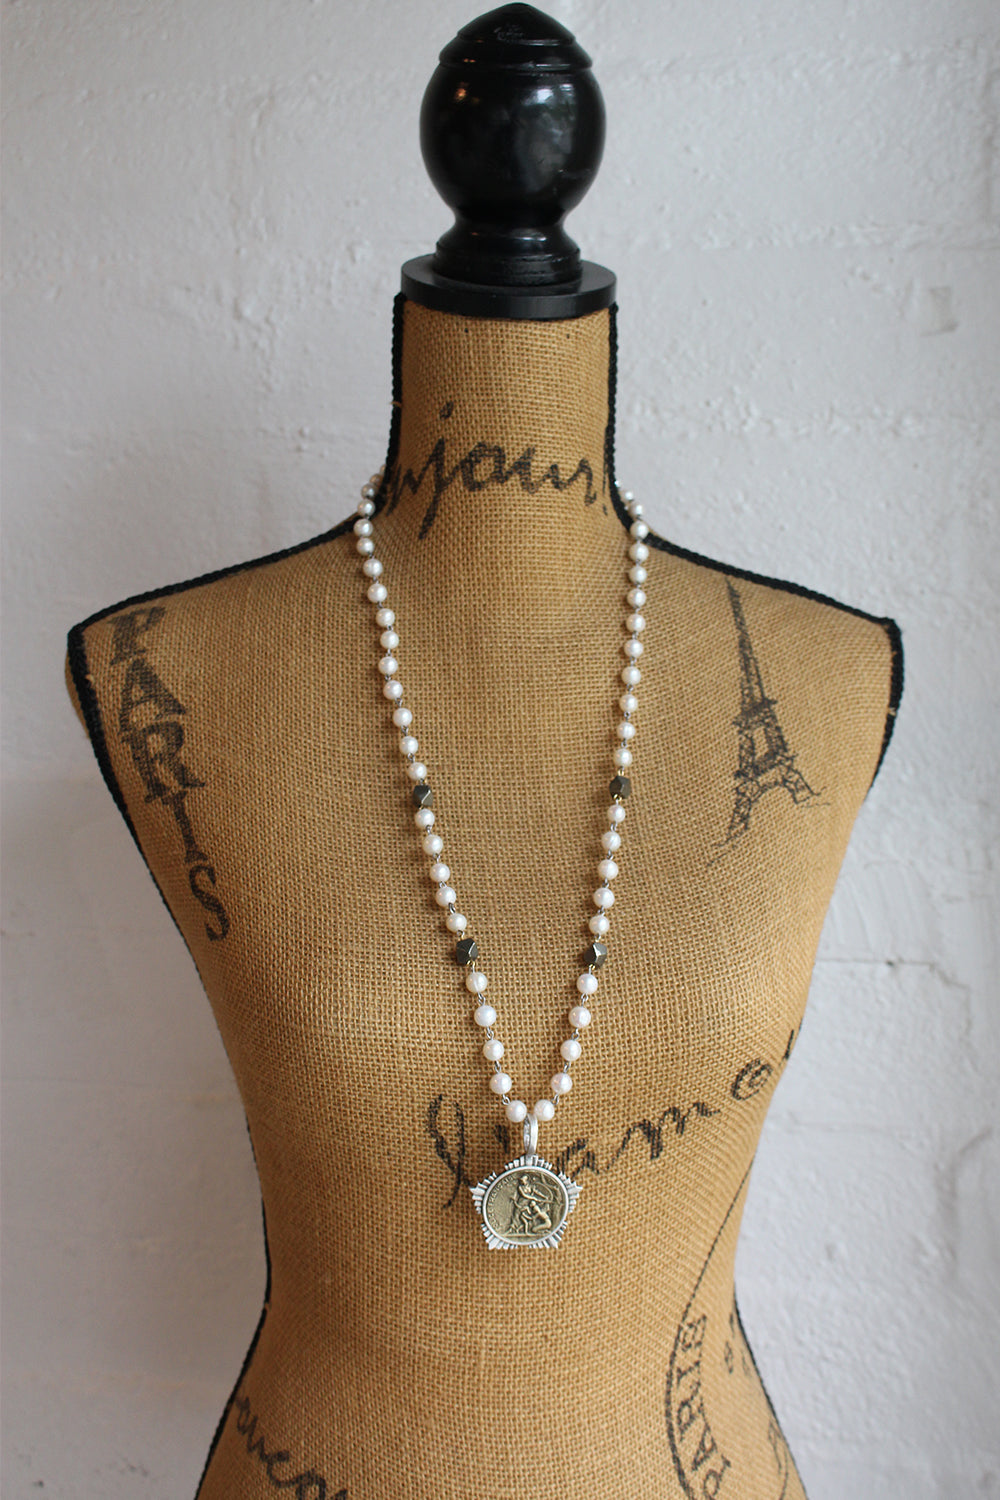 PEARLS WITH PYRITE AND PROTECTEUR MEDALLION